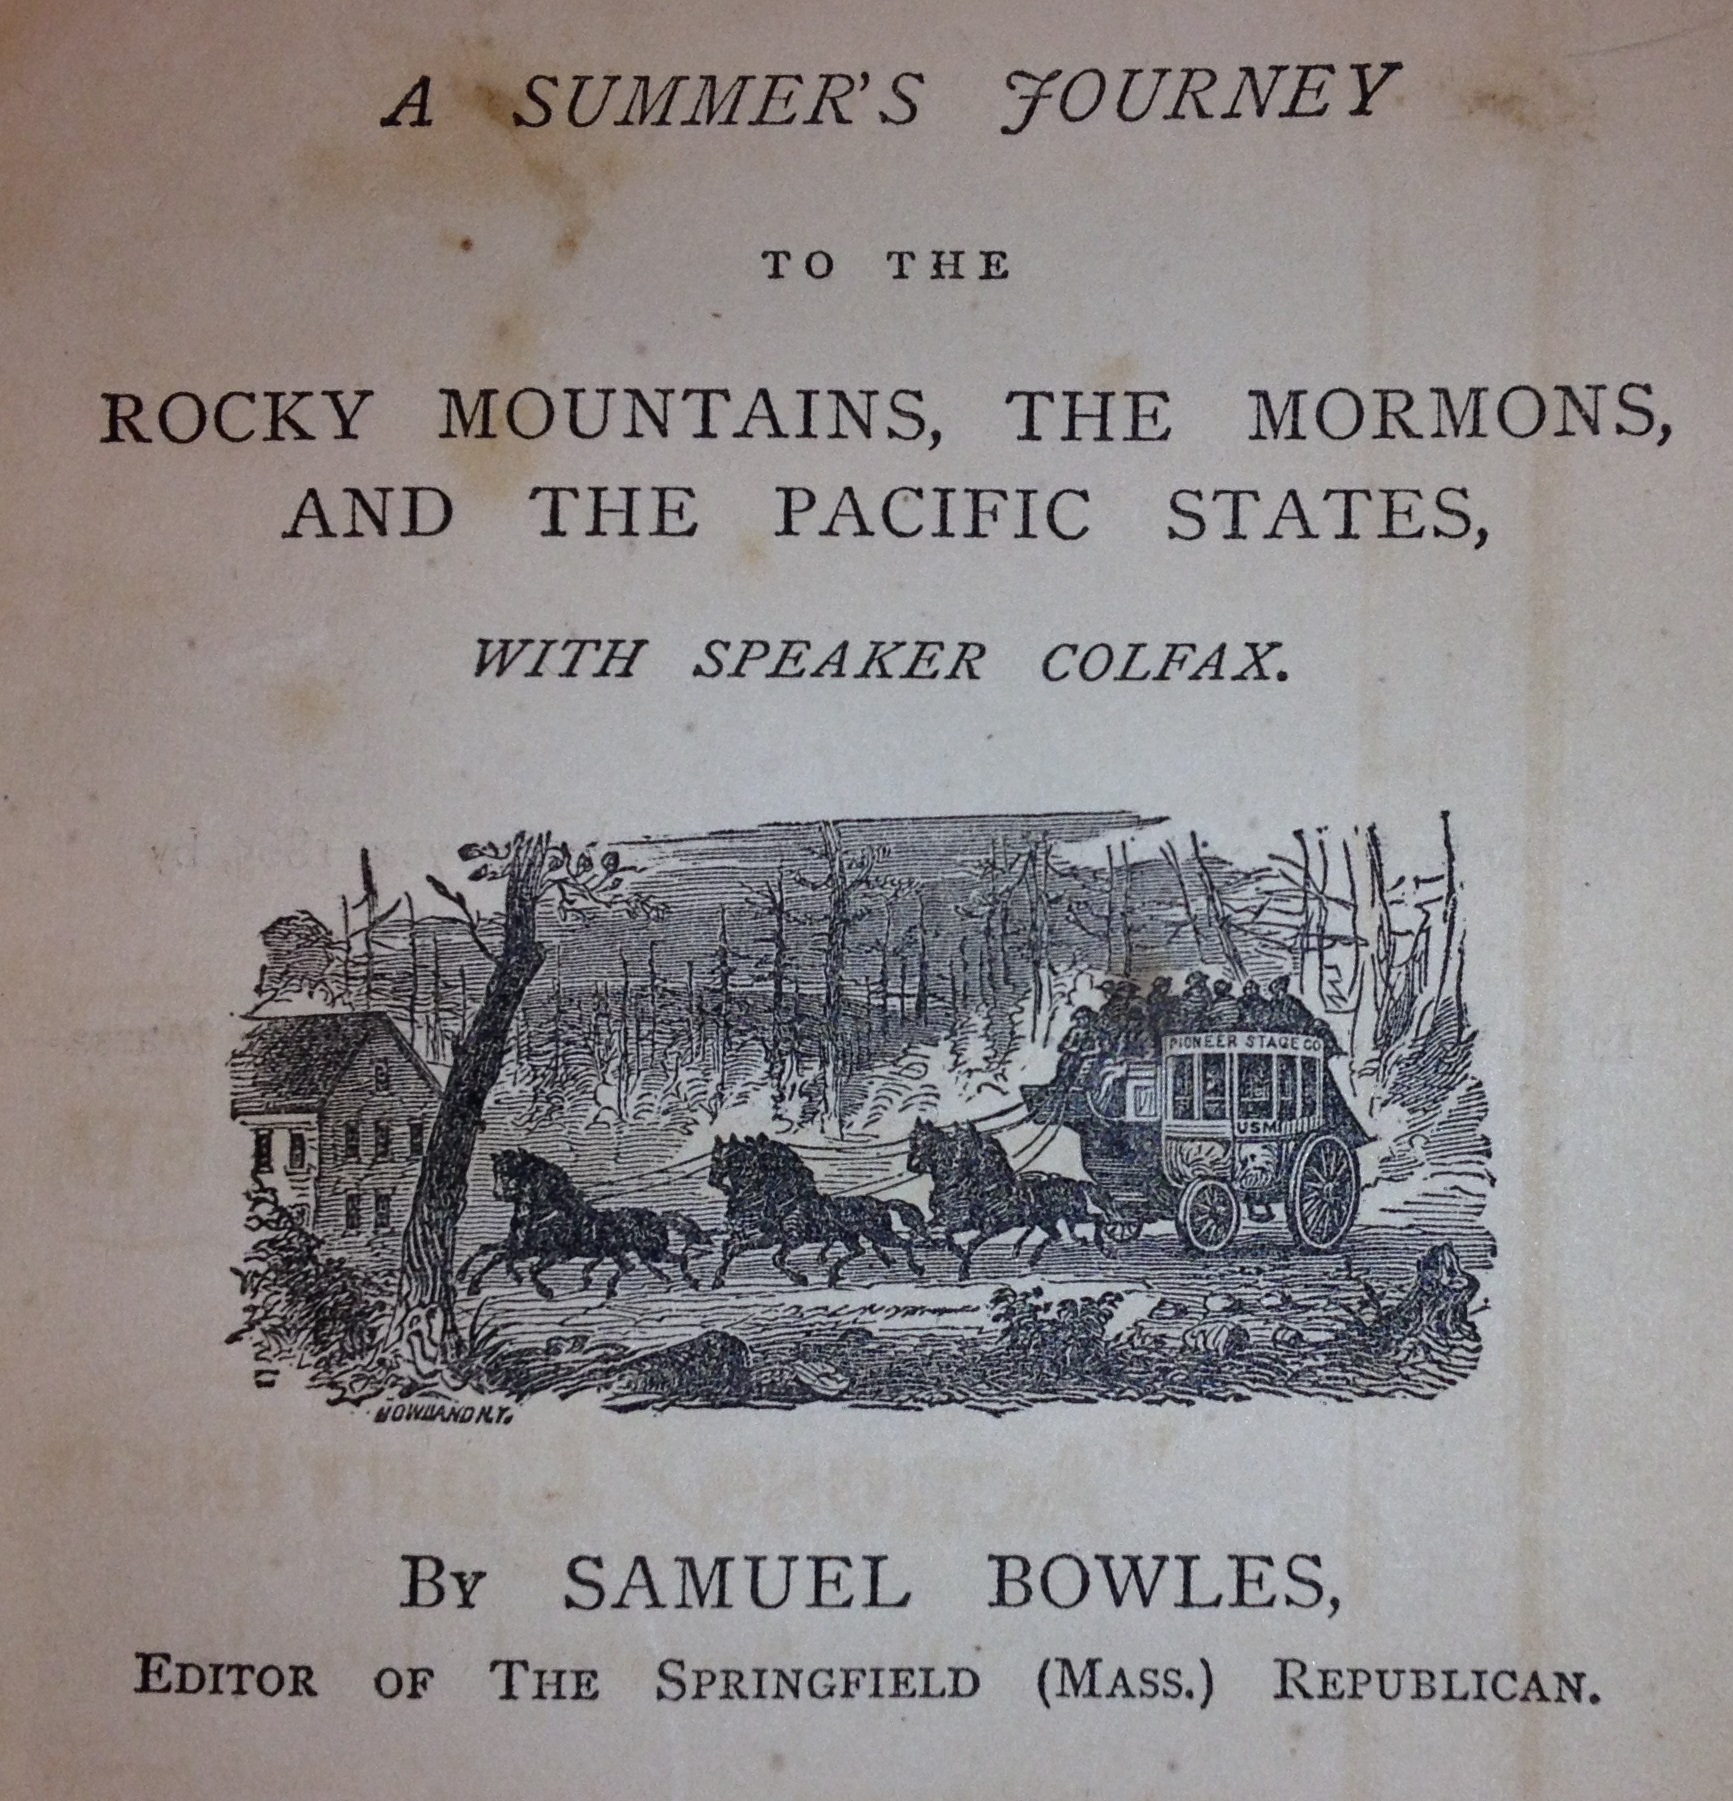 A Summer's Journey to the Rocky Mountains, the Mormons, and the Pacific States with Speaker Colfax. By Samuel Bowles, Editor of the Springfield (Mass.) Republican. 1866